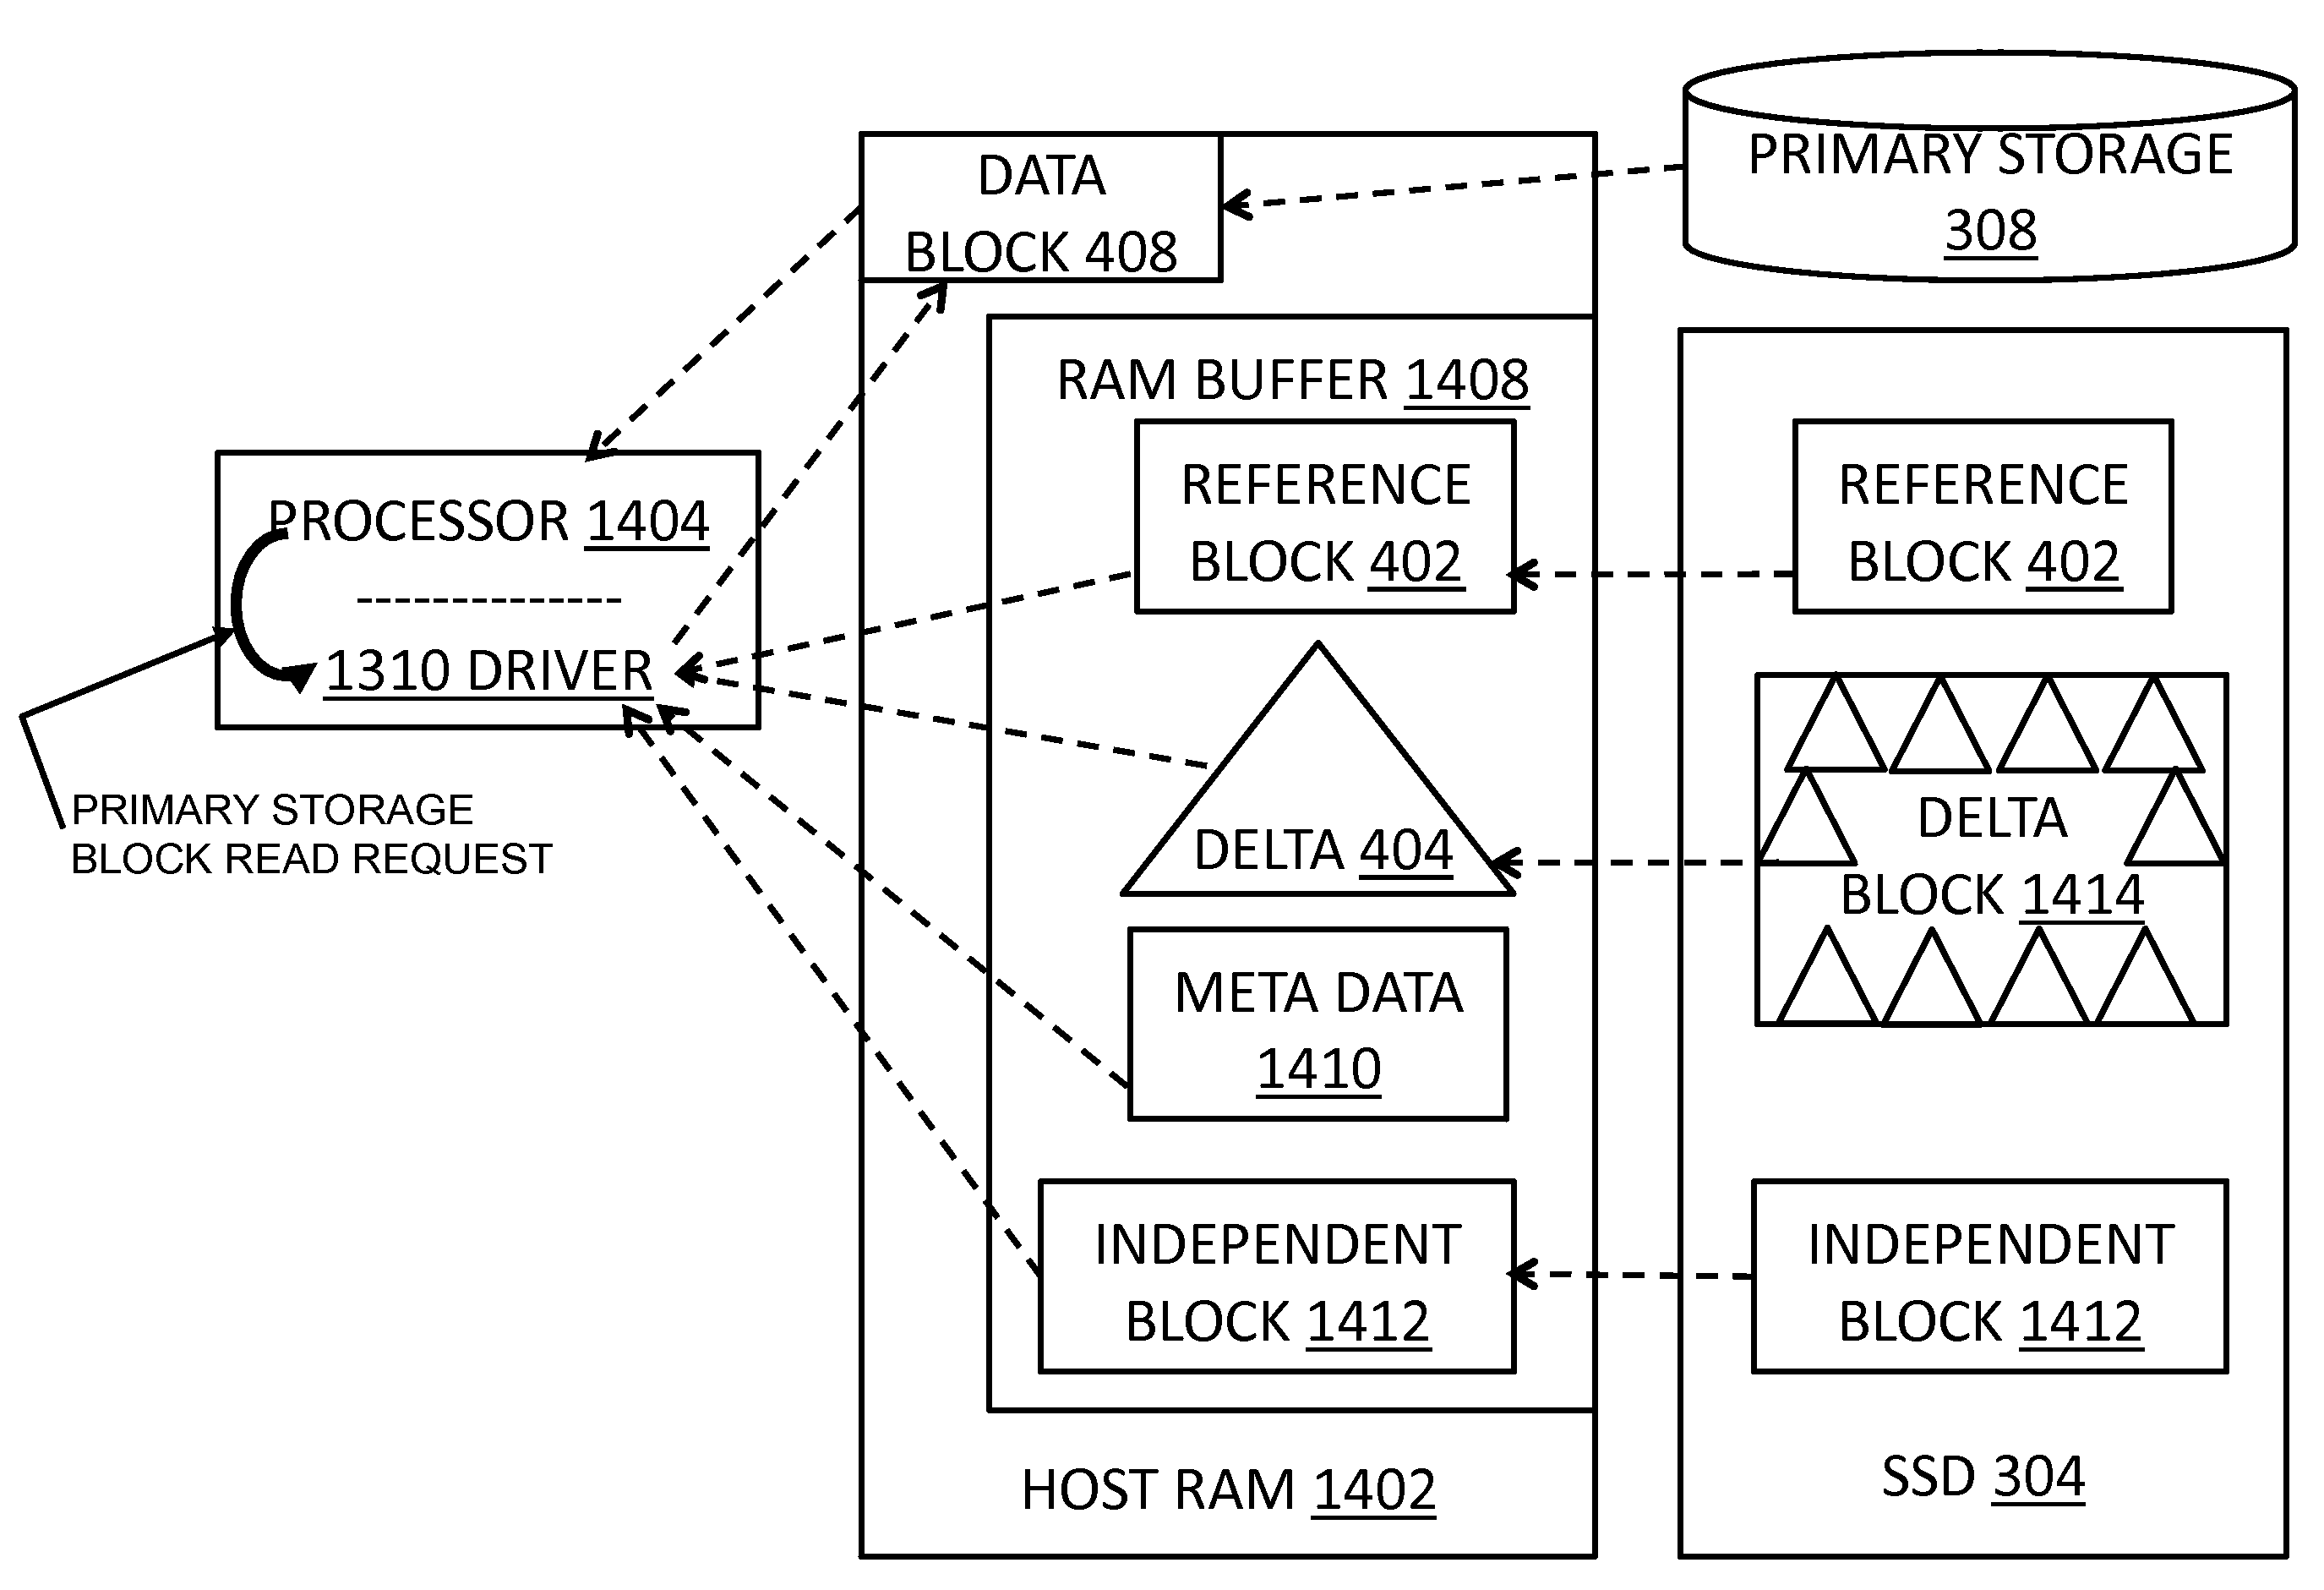 Content locality-based caching in a data storage system